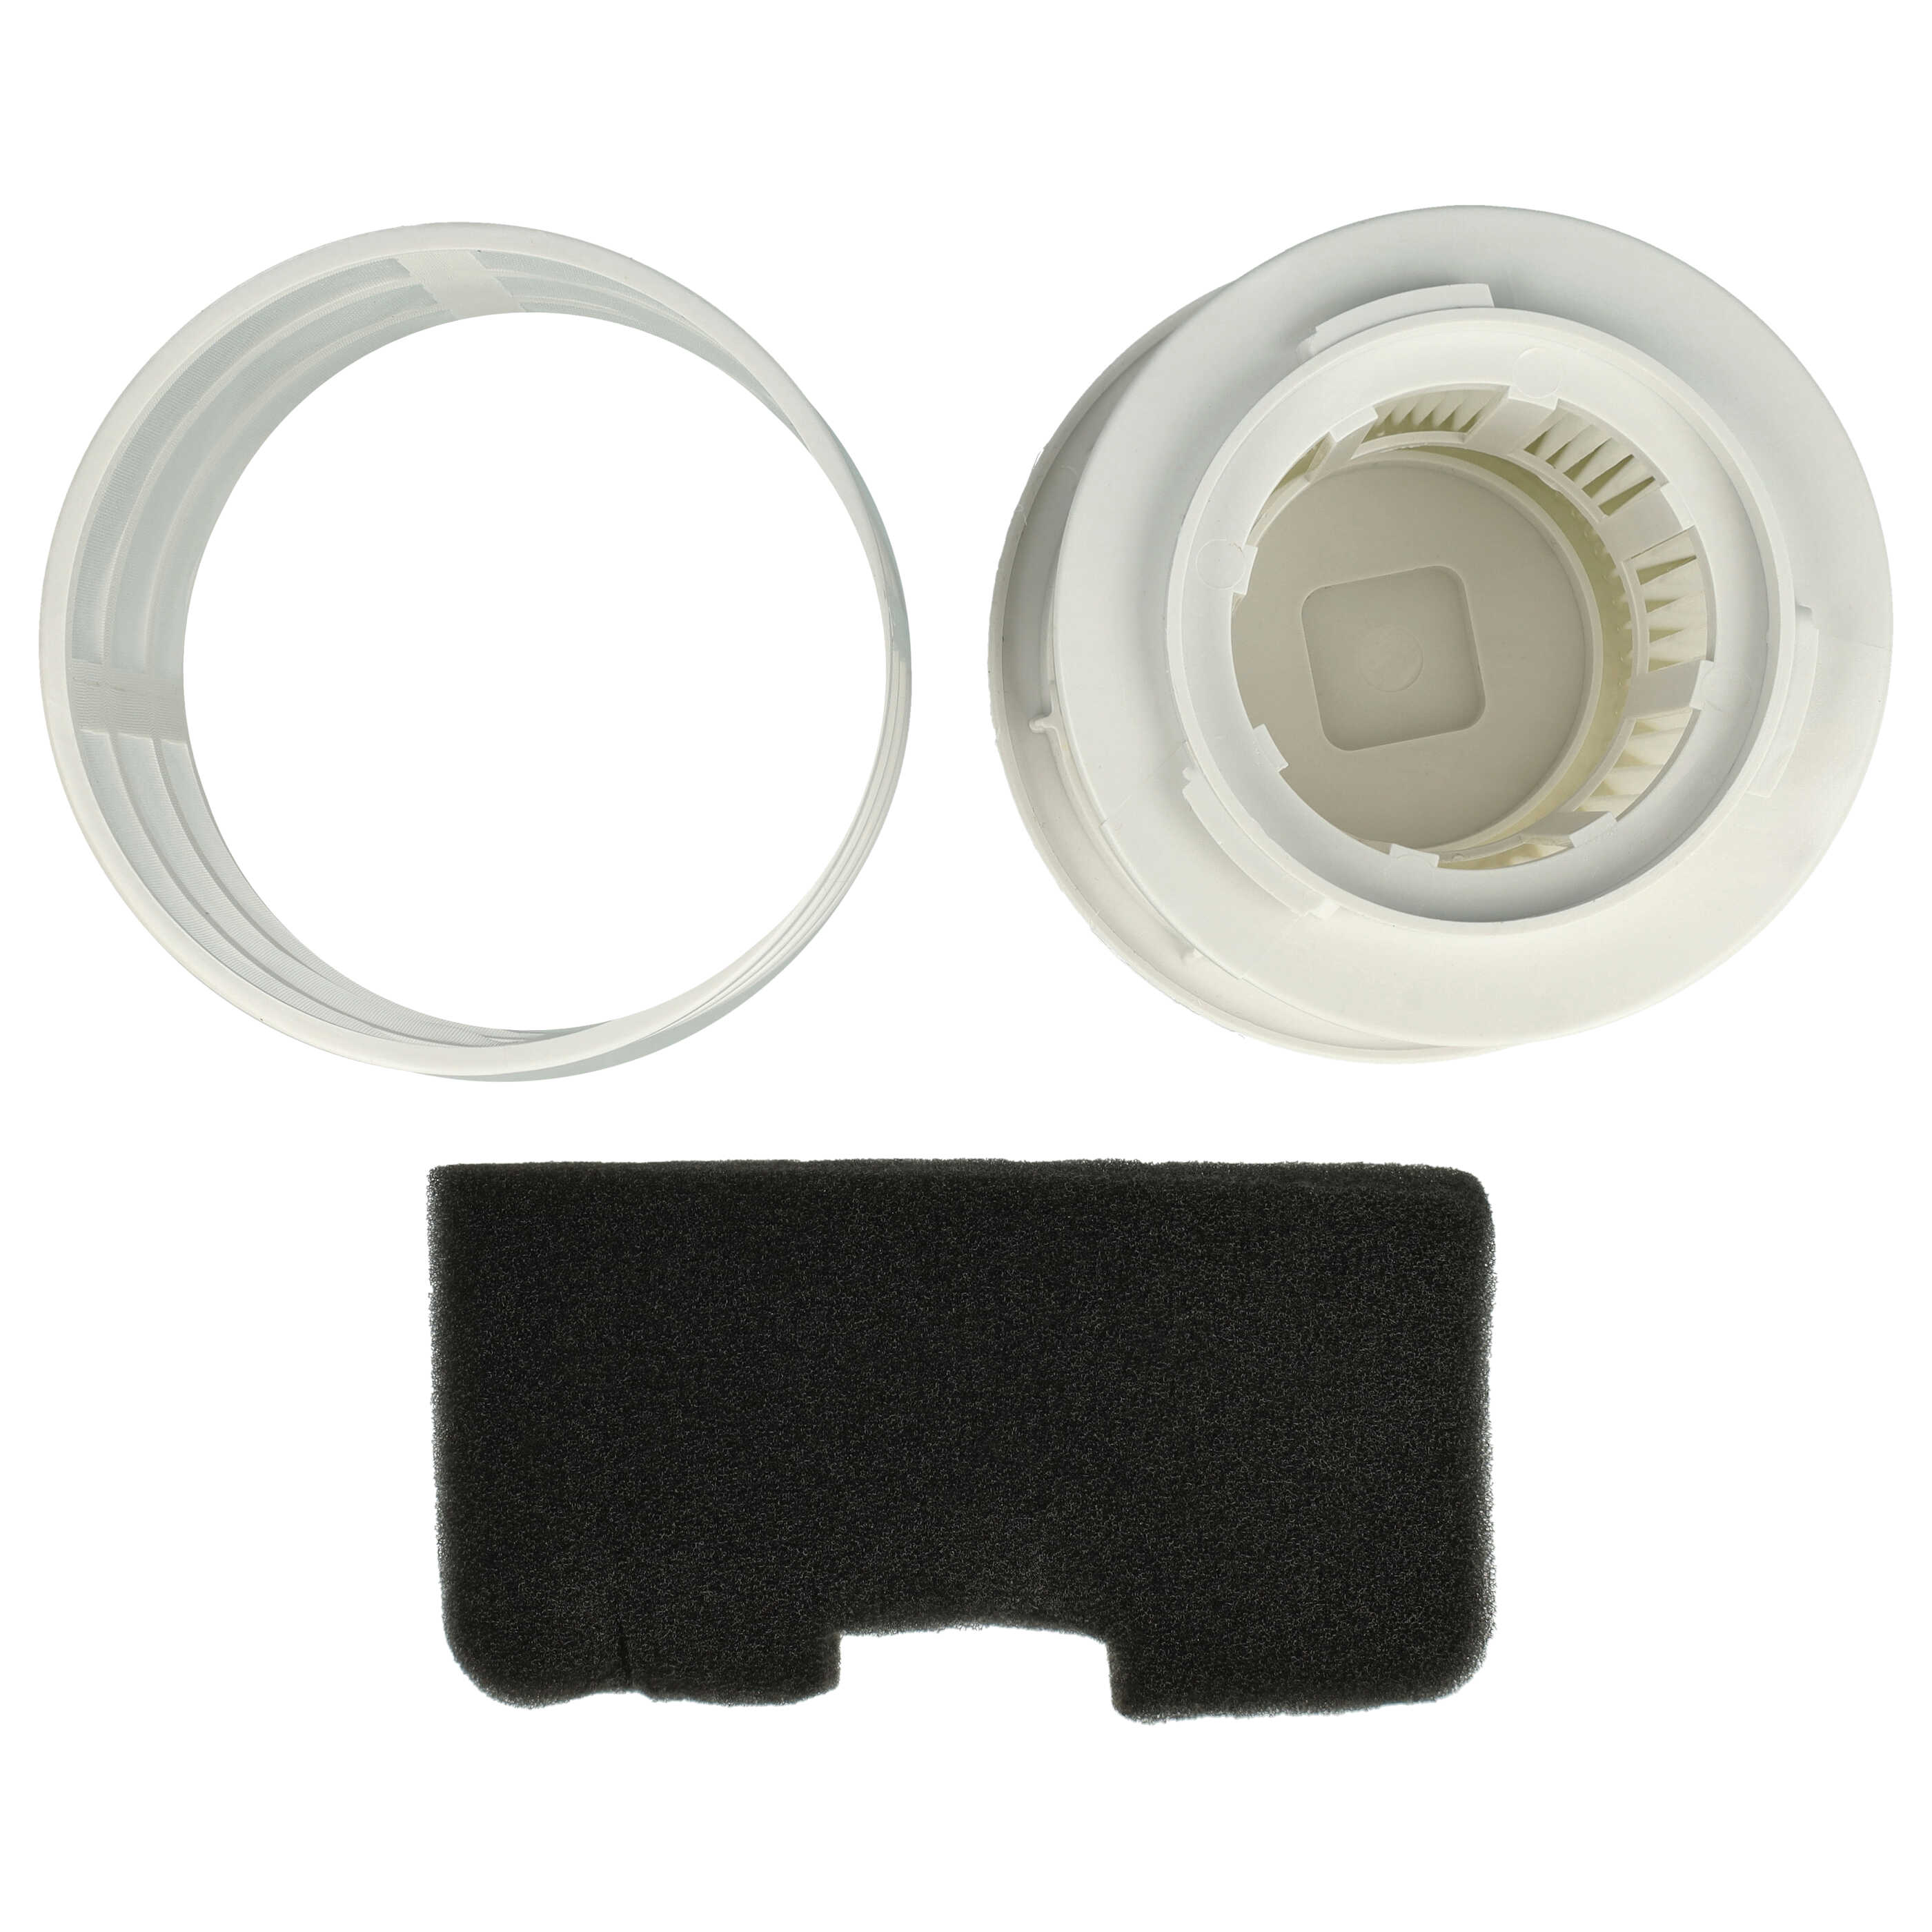 Filter Set replaces Hoover 35601328, U66 for Hoover Vacuum Cleaner - 2 pcs